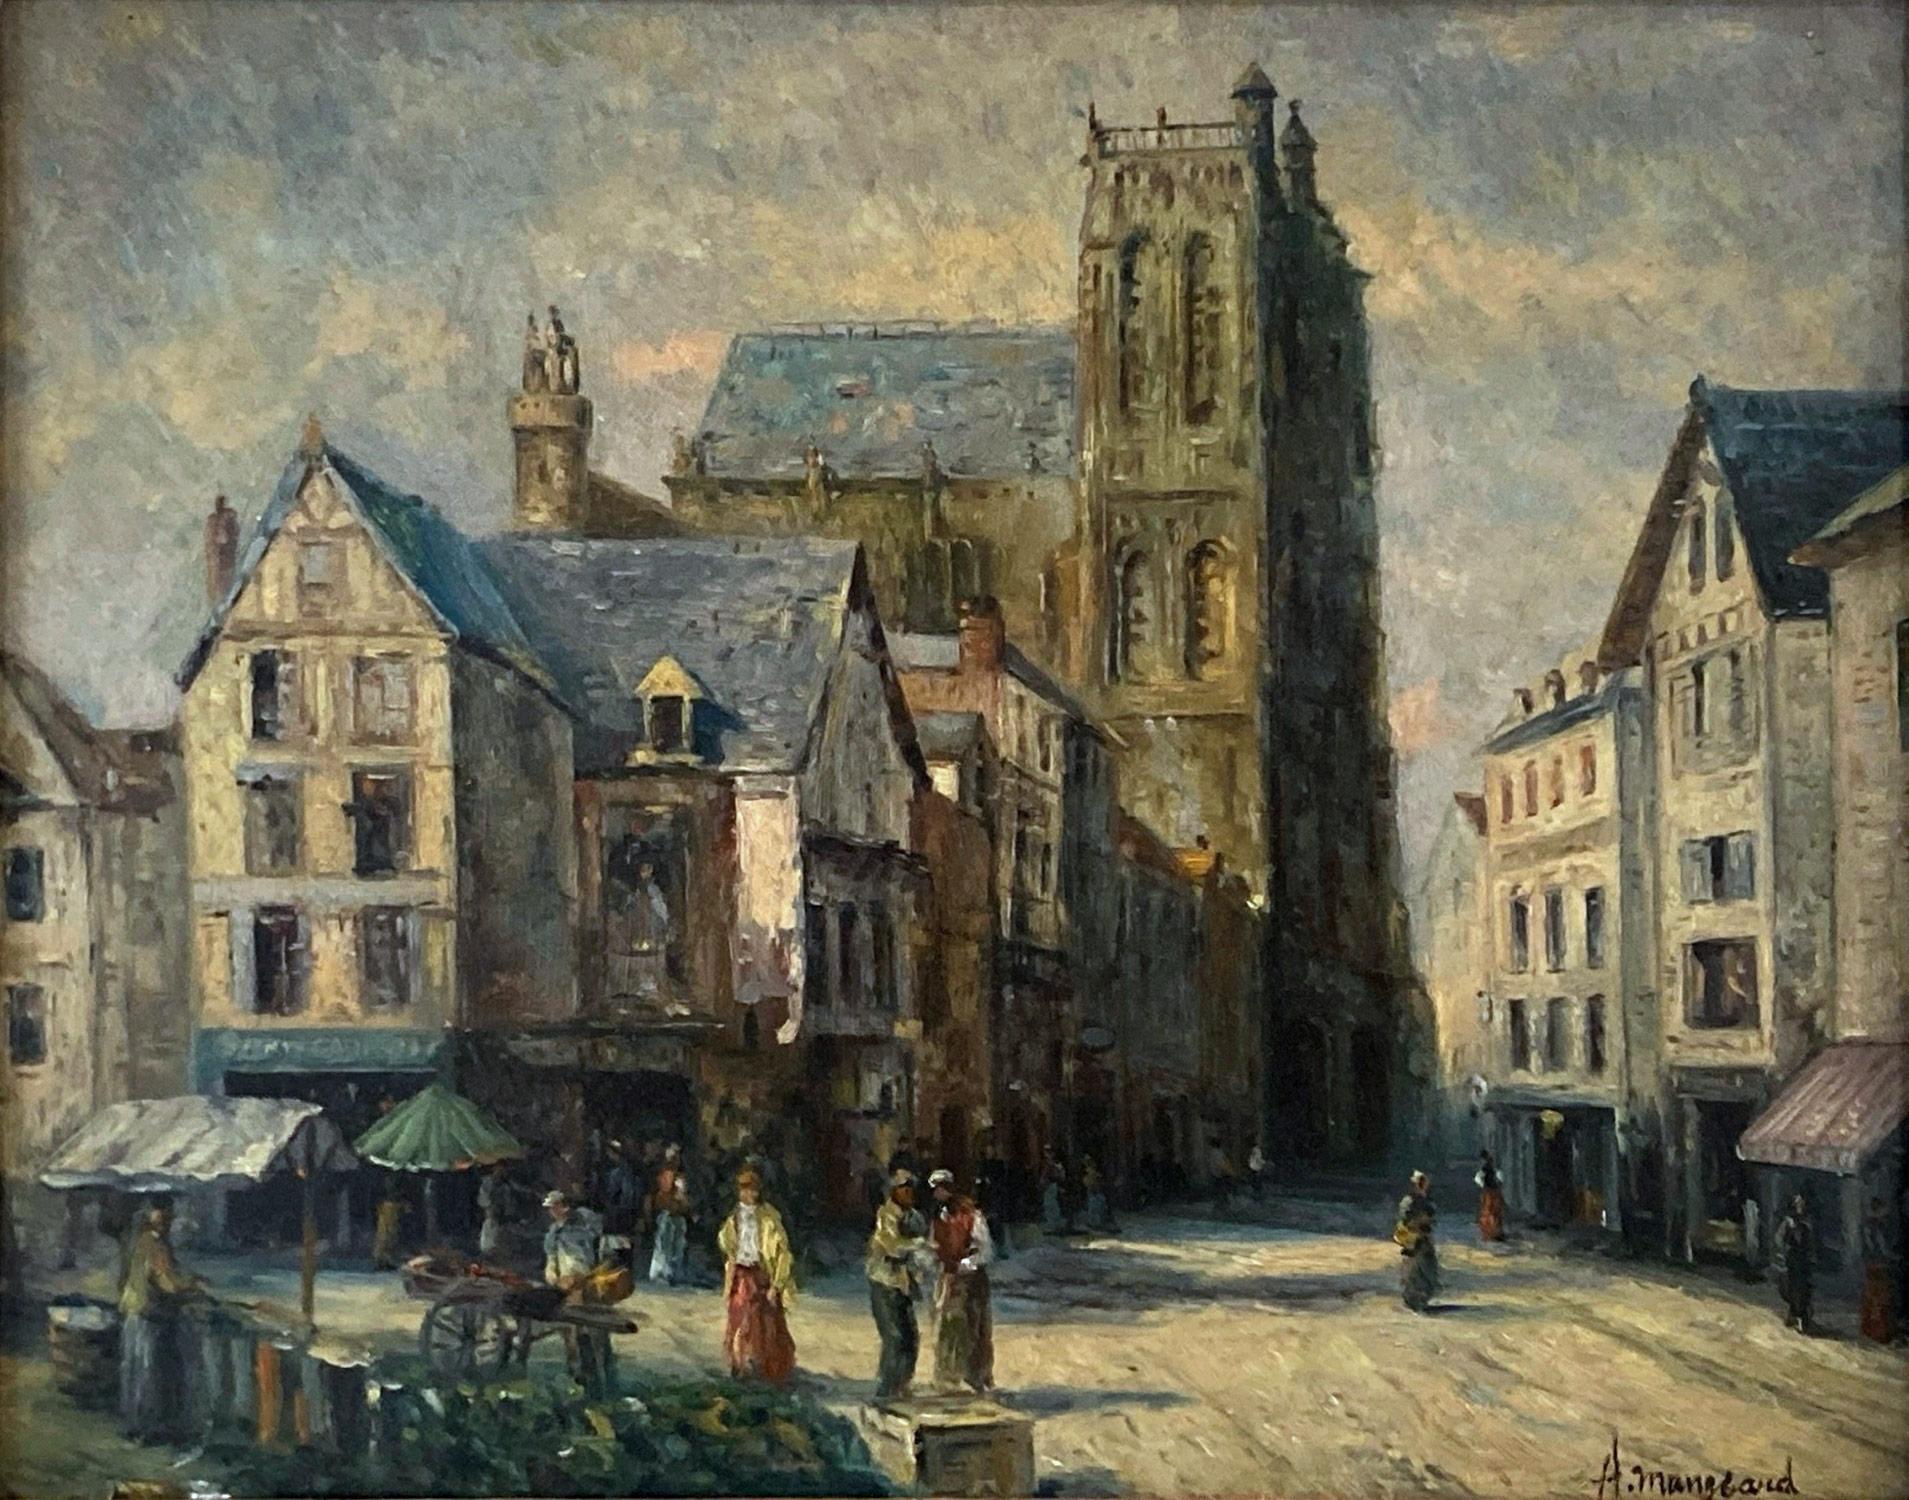 A stunning oil painting by Albert Munghard depicting figures by the Church of St. Wilfran, this piece was created after the great British artist of the times William Lee Hankey, capturing the impression of the misty, day, the reflections on the